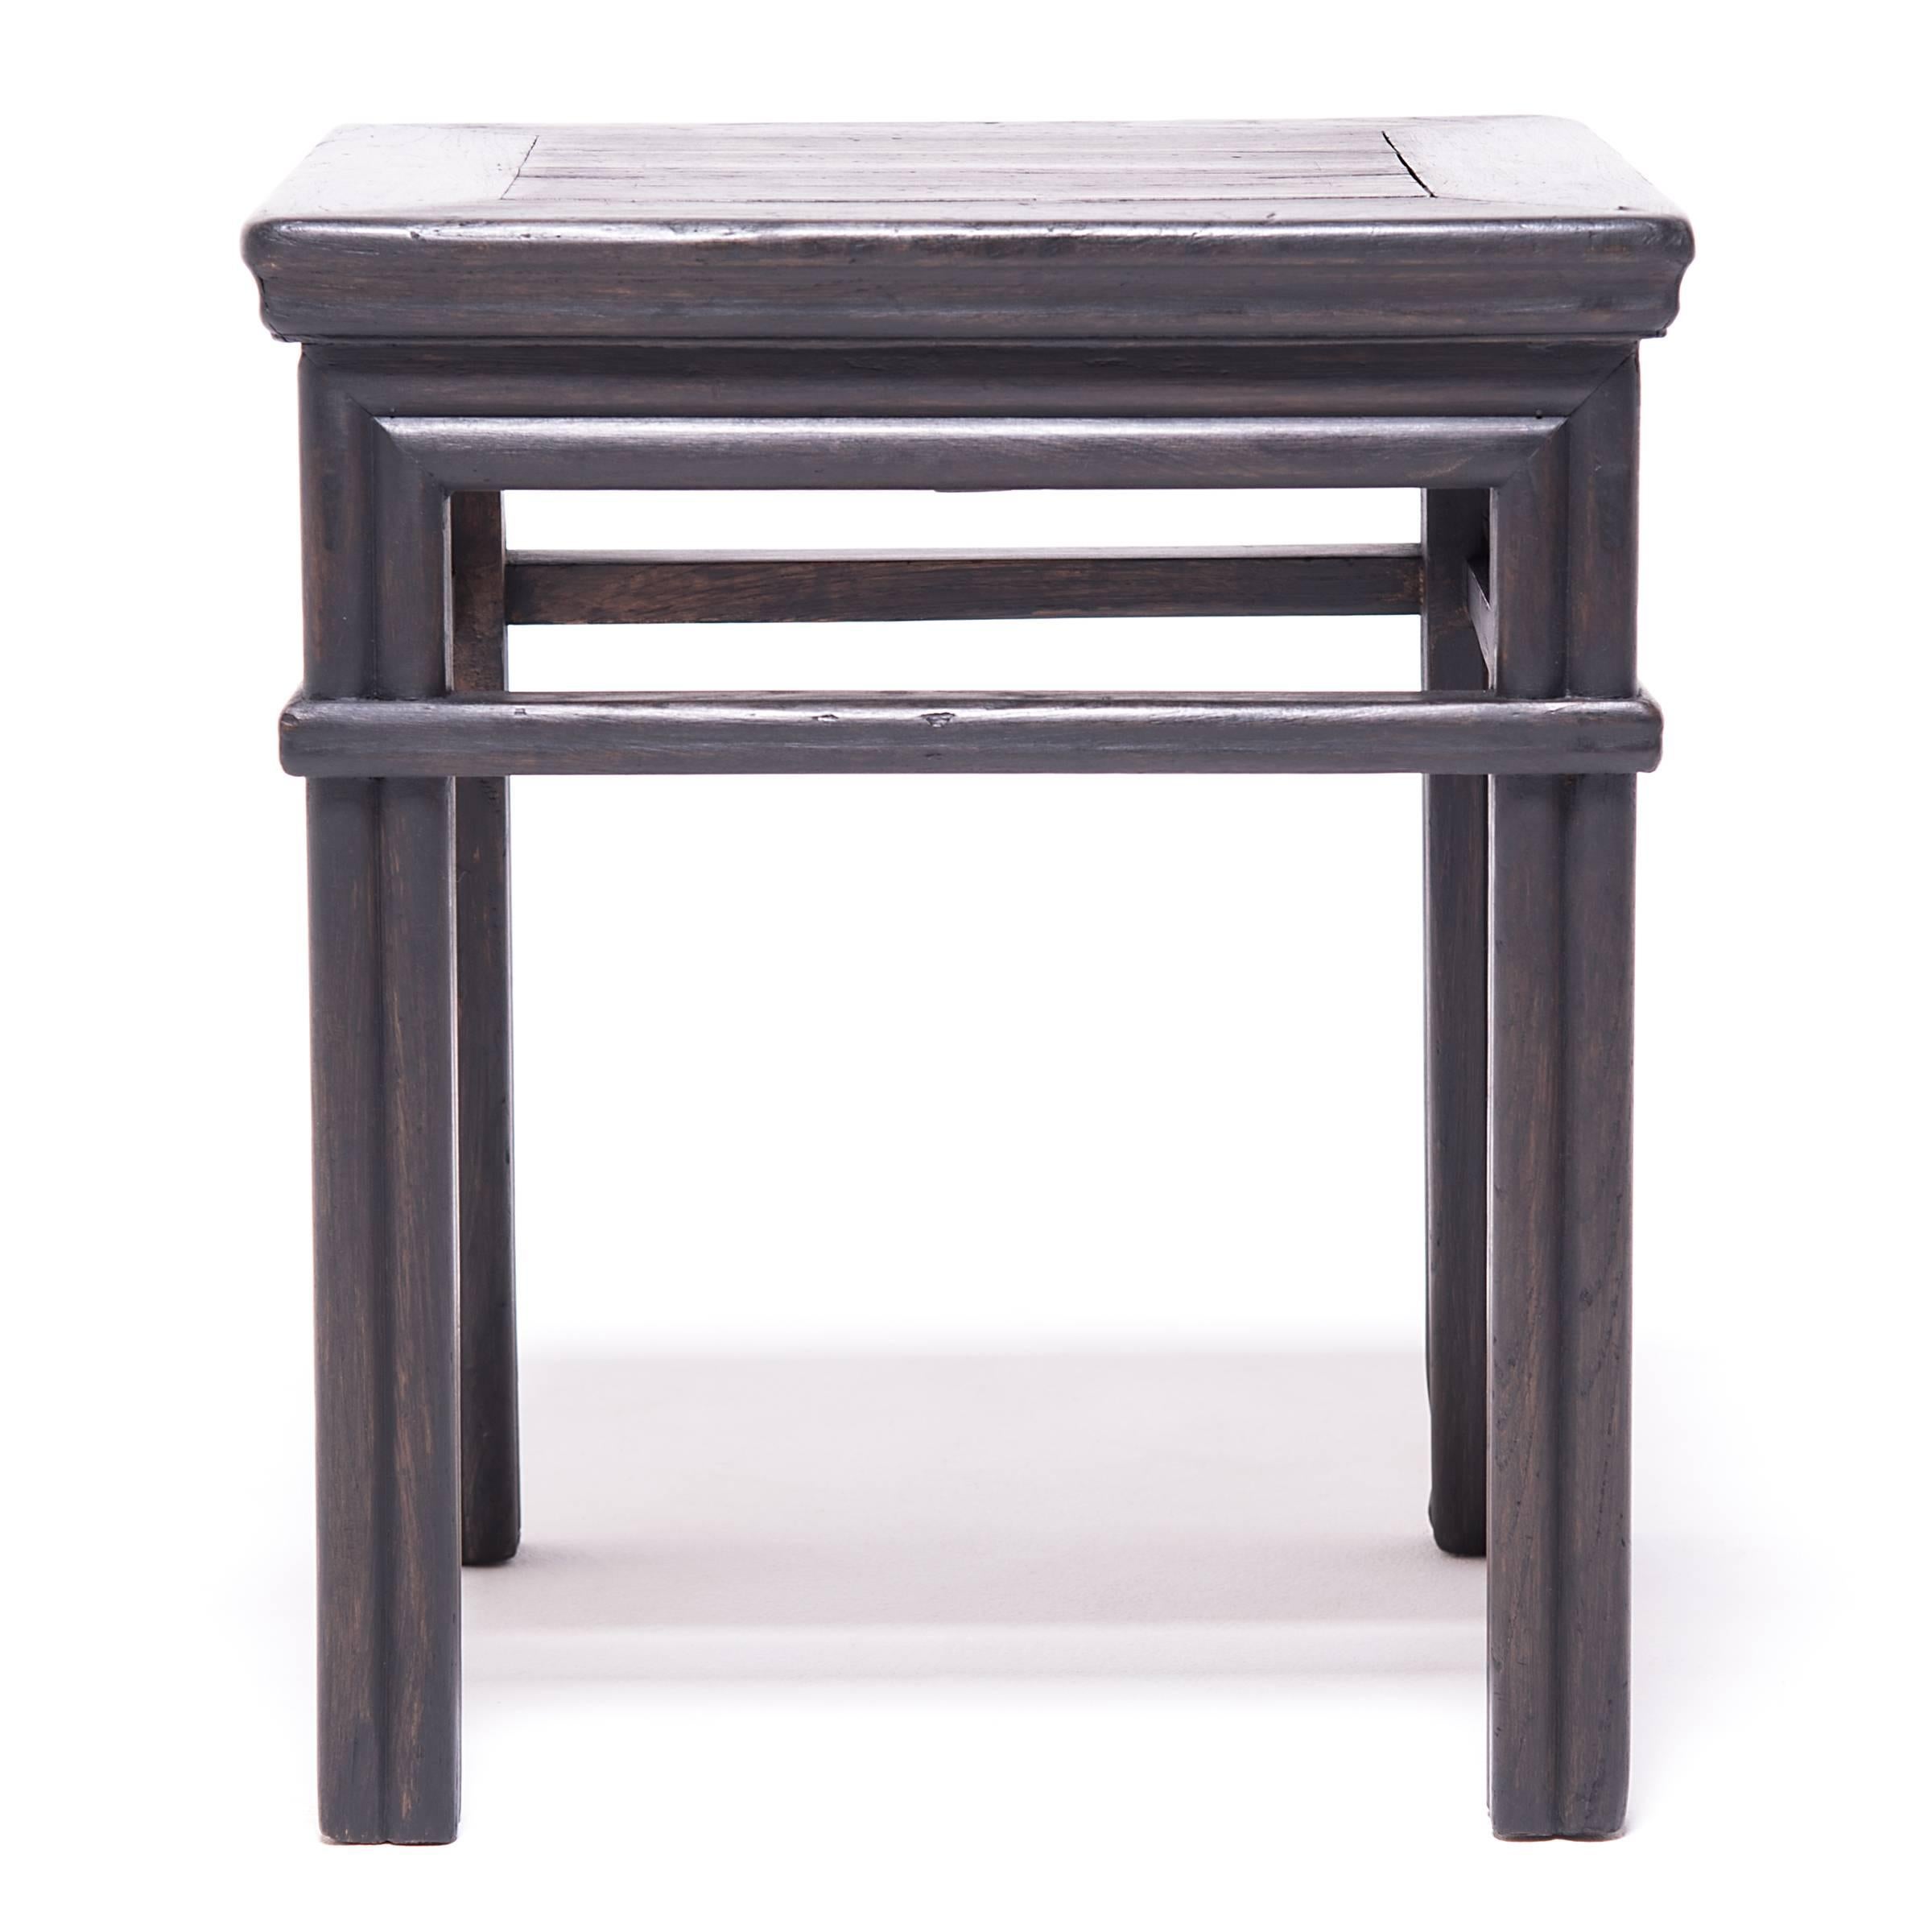 This form of square stool, or fang deng, was a versatile seating option and was pulled up for use at mealtimes or used outdoors in a courtyard or garden. The pair is expertly crafted of northern elm (yumu) with mortise-and-tenon joinery and a dark